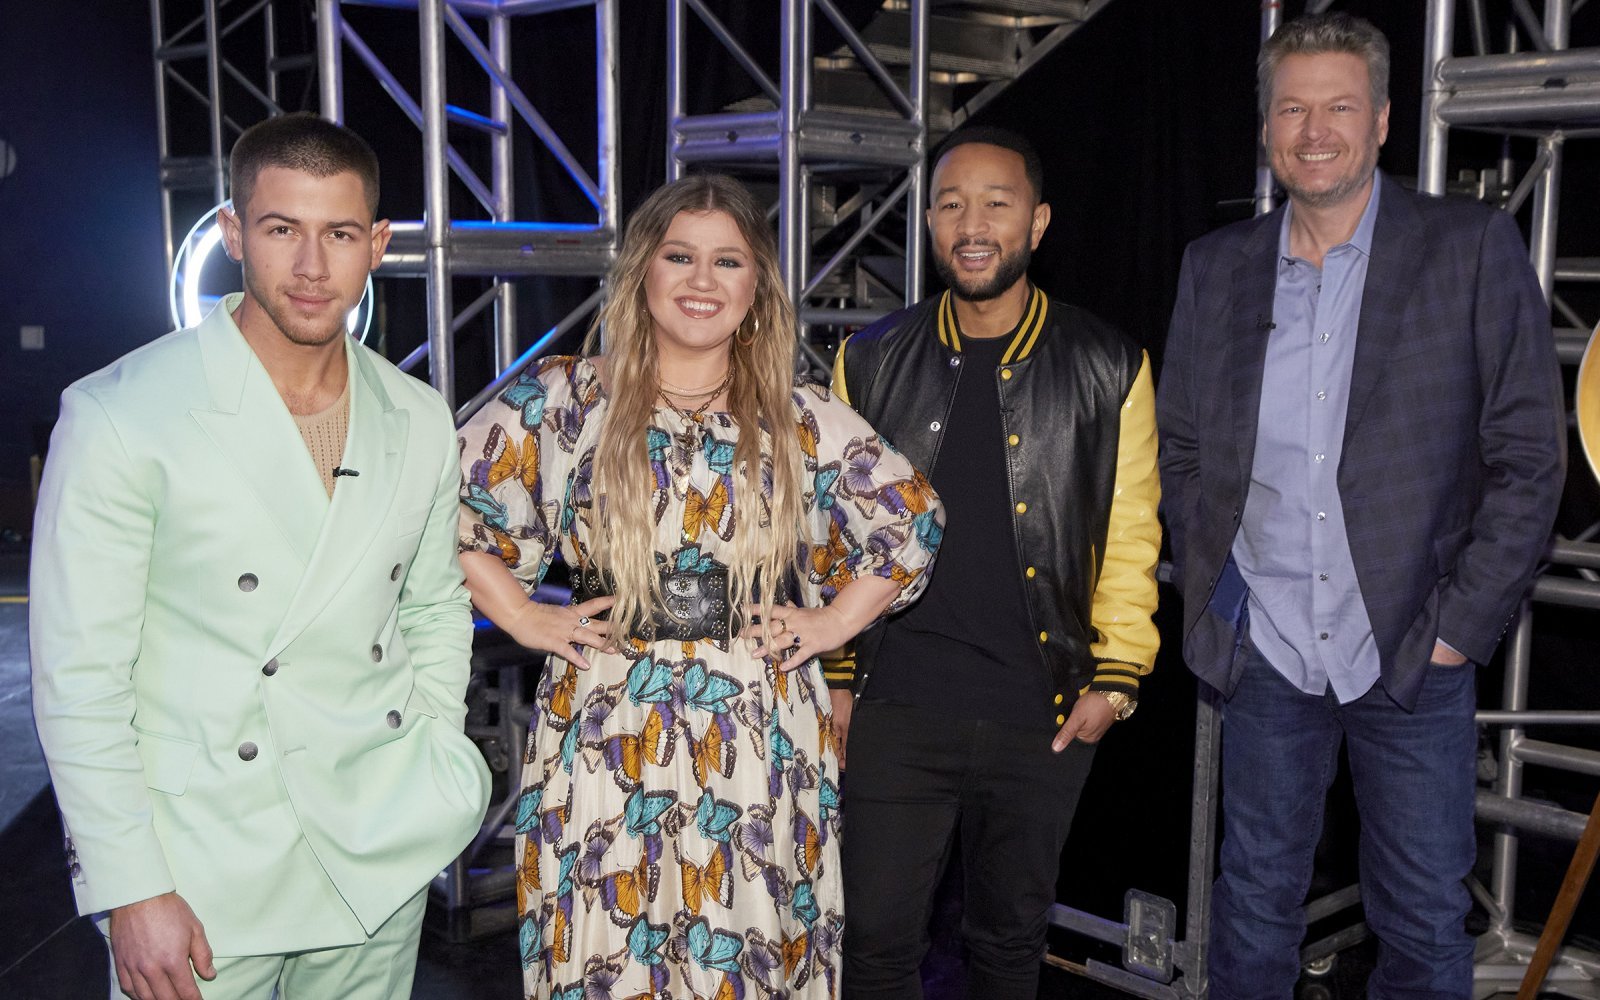 'The Voice' cutting back to only one season per year beginning in 2021